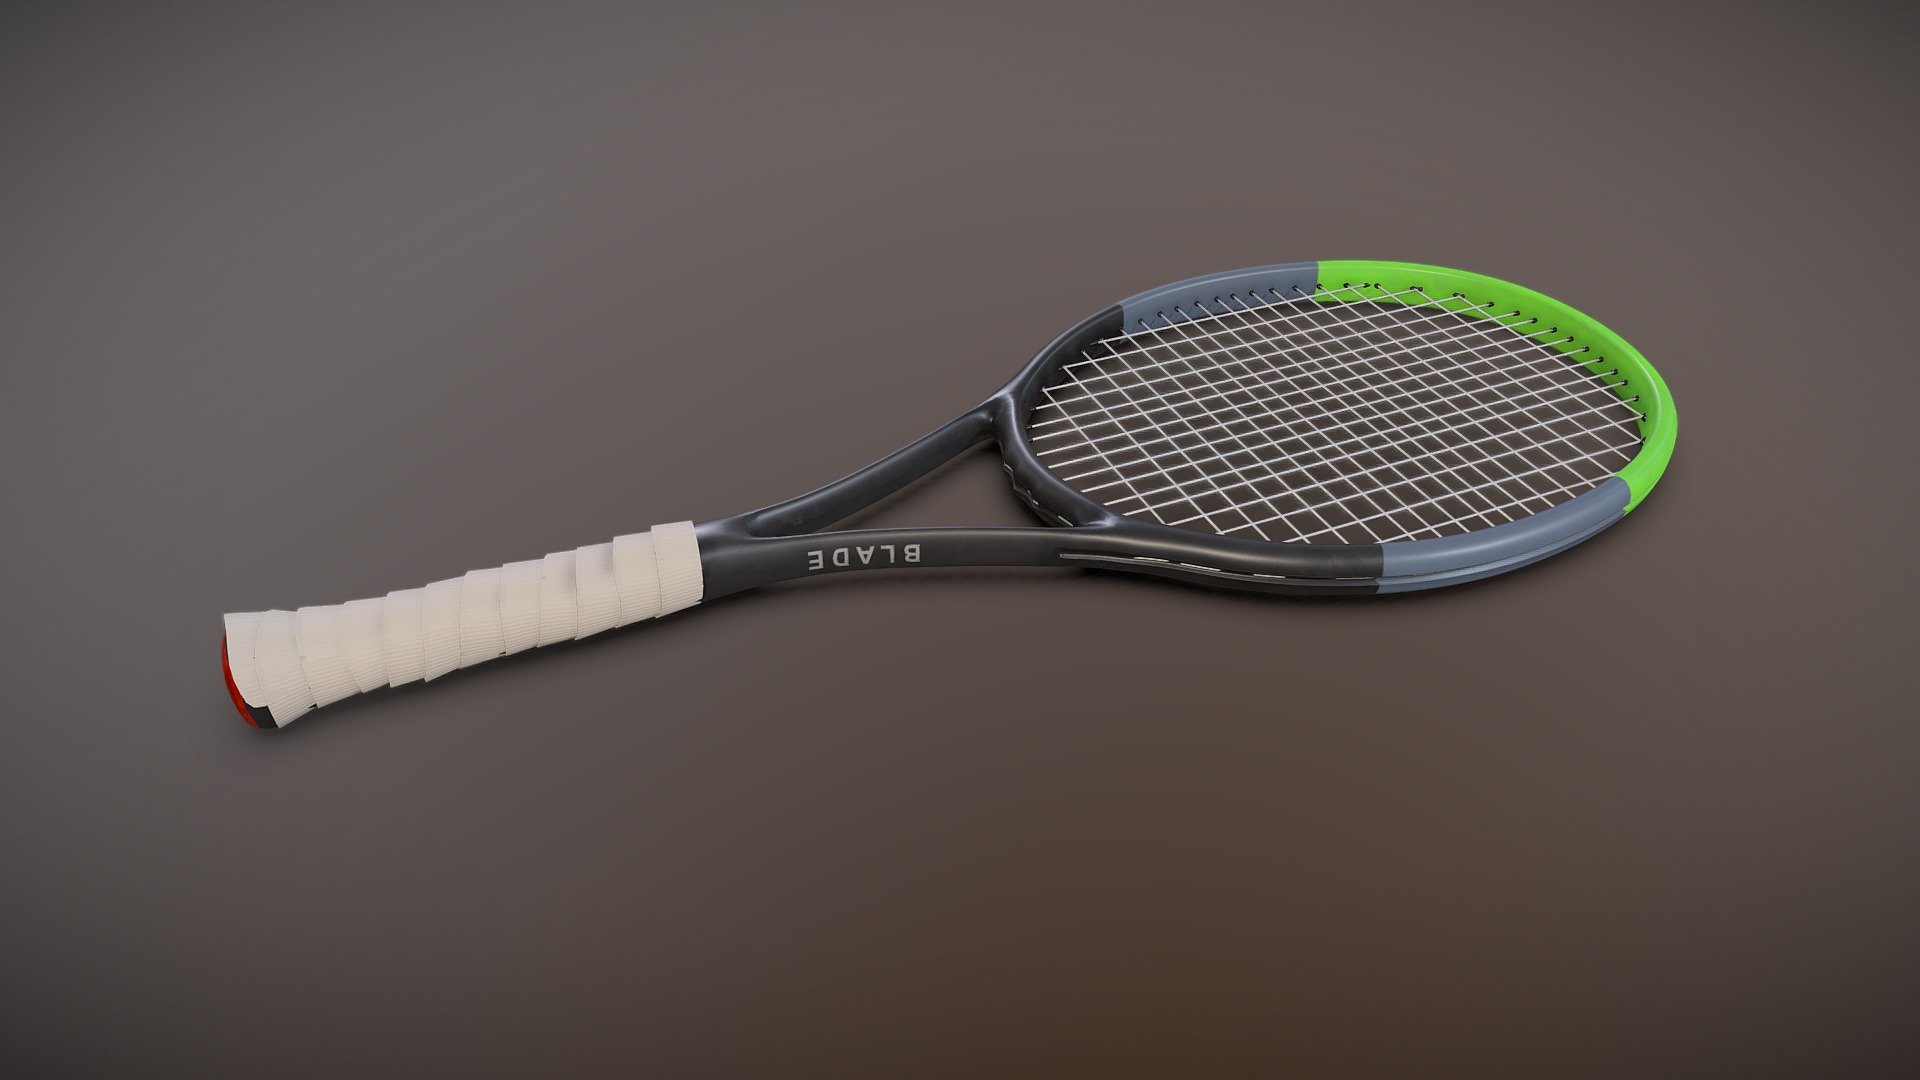 3D model Racket Wilson Blade
Formats: .blend | .fbx | .dae | .stl | .obj |

Detailed Description Info:




Model: Tennis Racket Wilson Blade

Media Type: 3D Model

Geometry: Quads/Tris

Textures: Yes

Materials: Yes

Rigged: No

Animated: No

UV Mapped: Yes

Unwrapped UV’s: Yes Non Overlapping
 - Tennis Racket Wilson Blade - Download Free 3D model by Murizn (@Murzin) 3d model